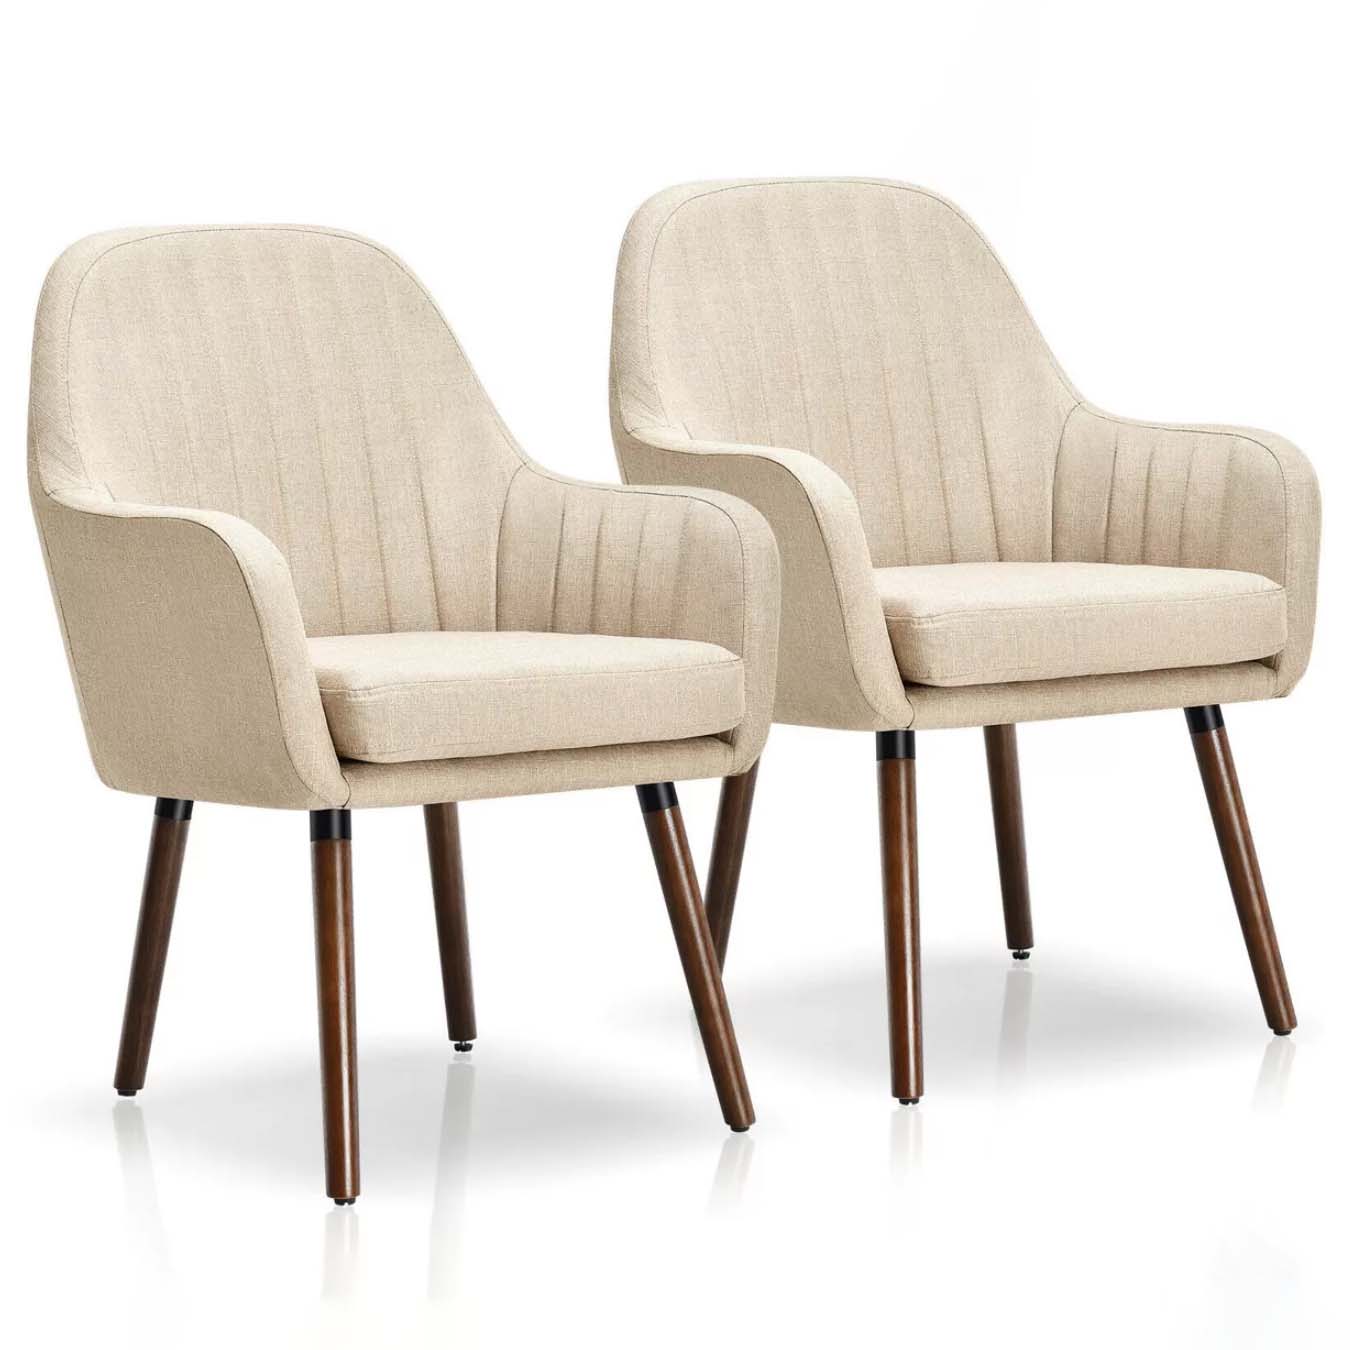 Set of 2 white accent chairs